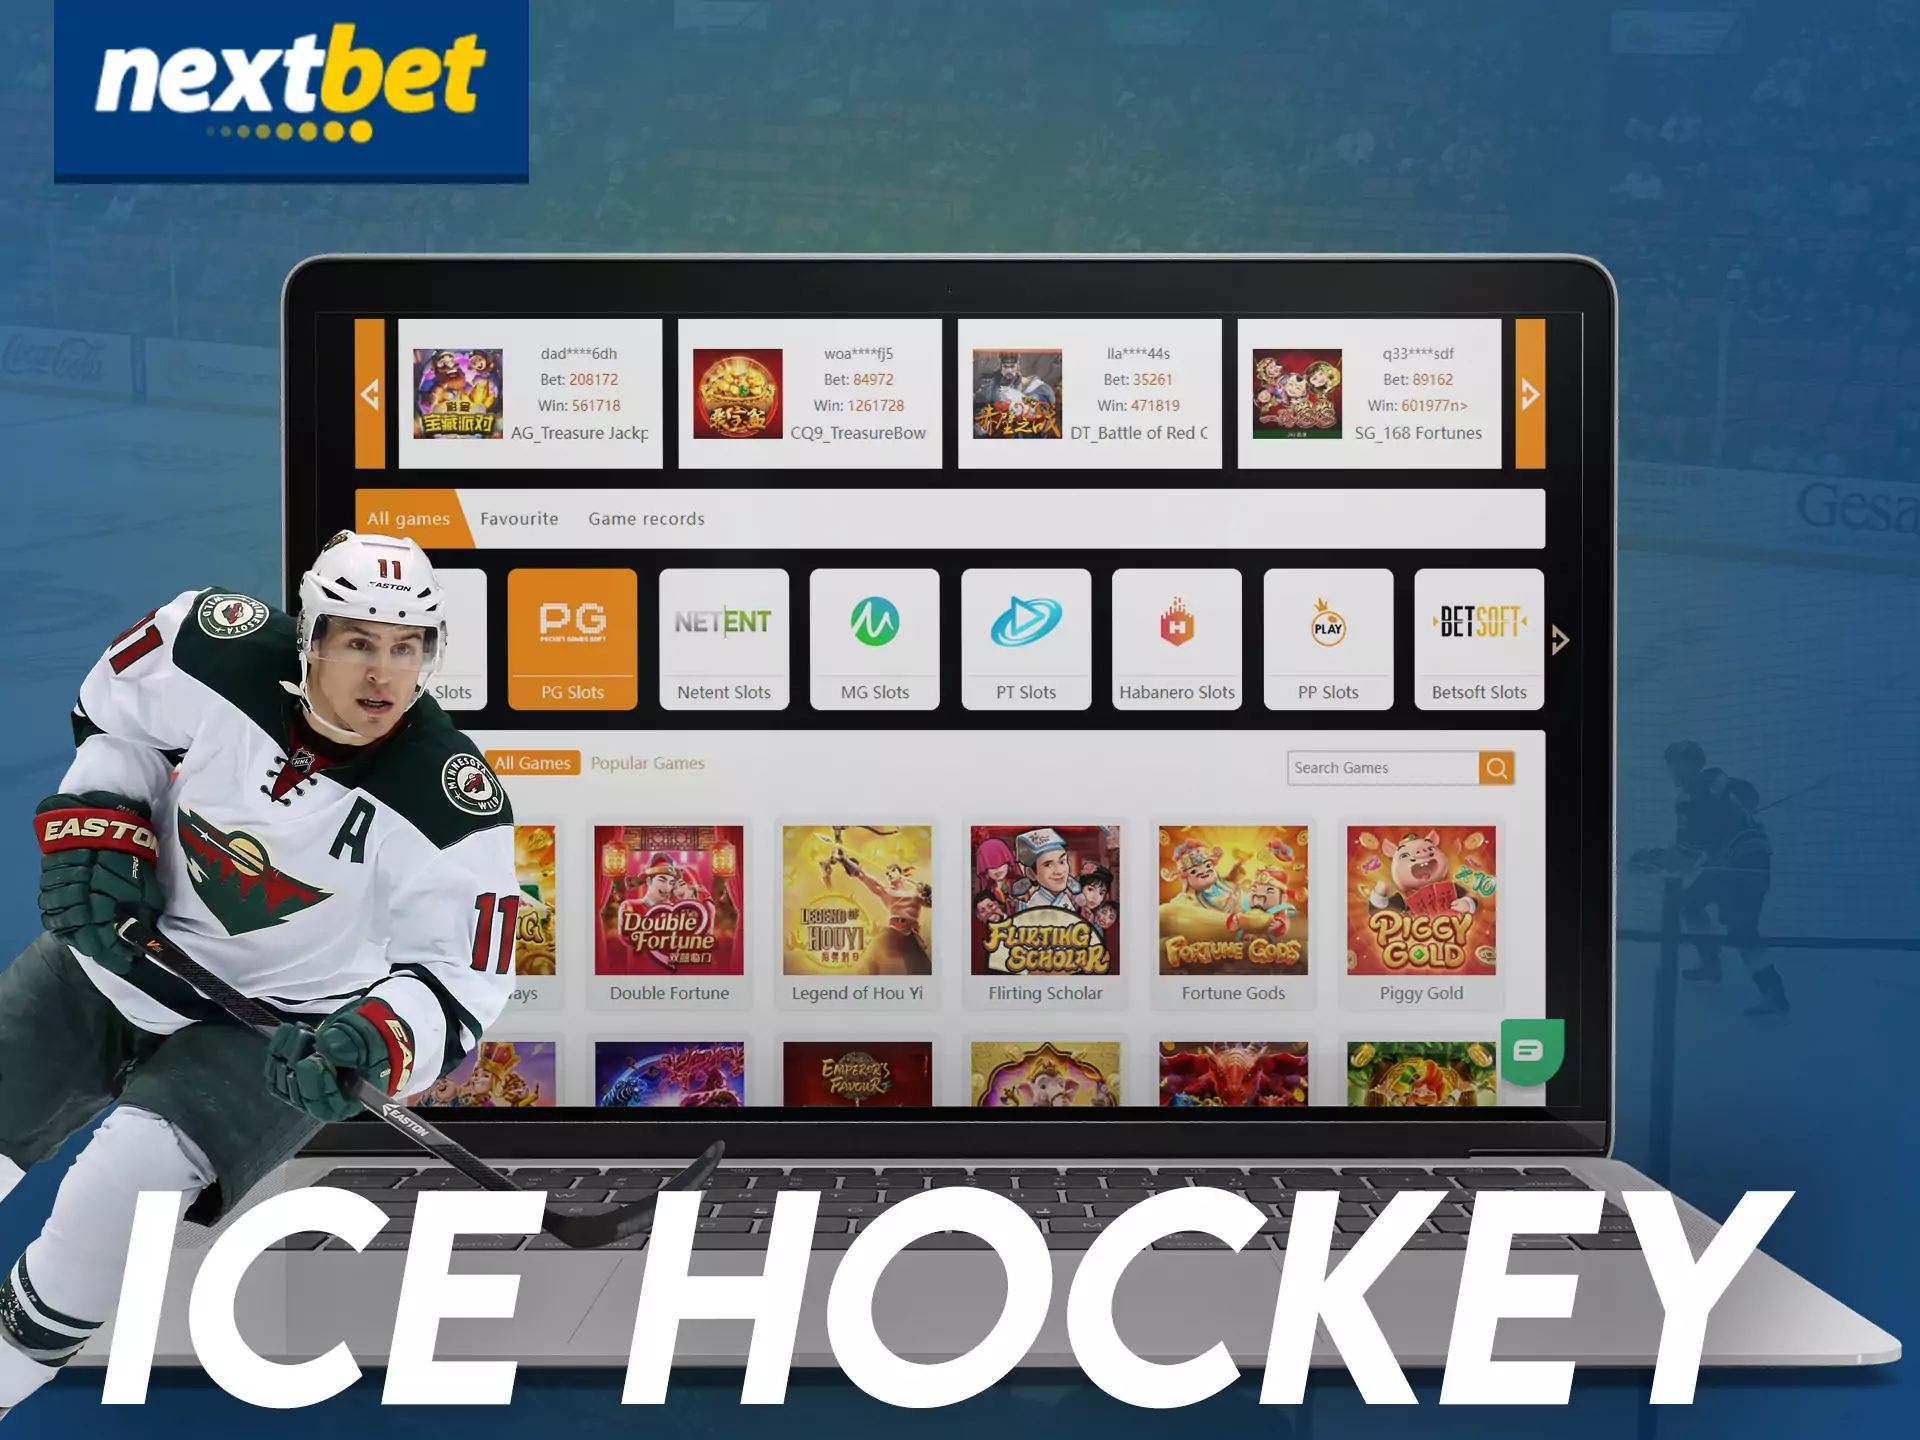 If you are a hockey fan, then bet on this sport in Nextbet.